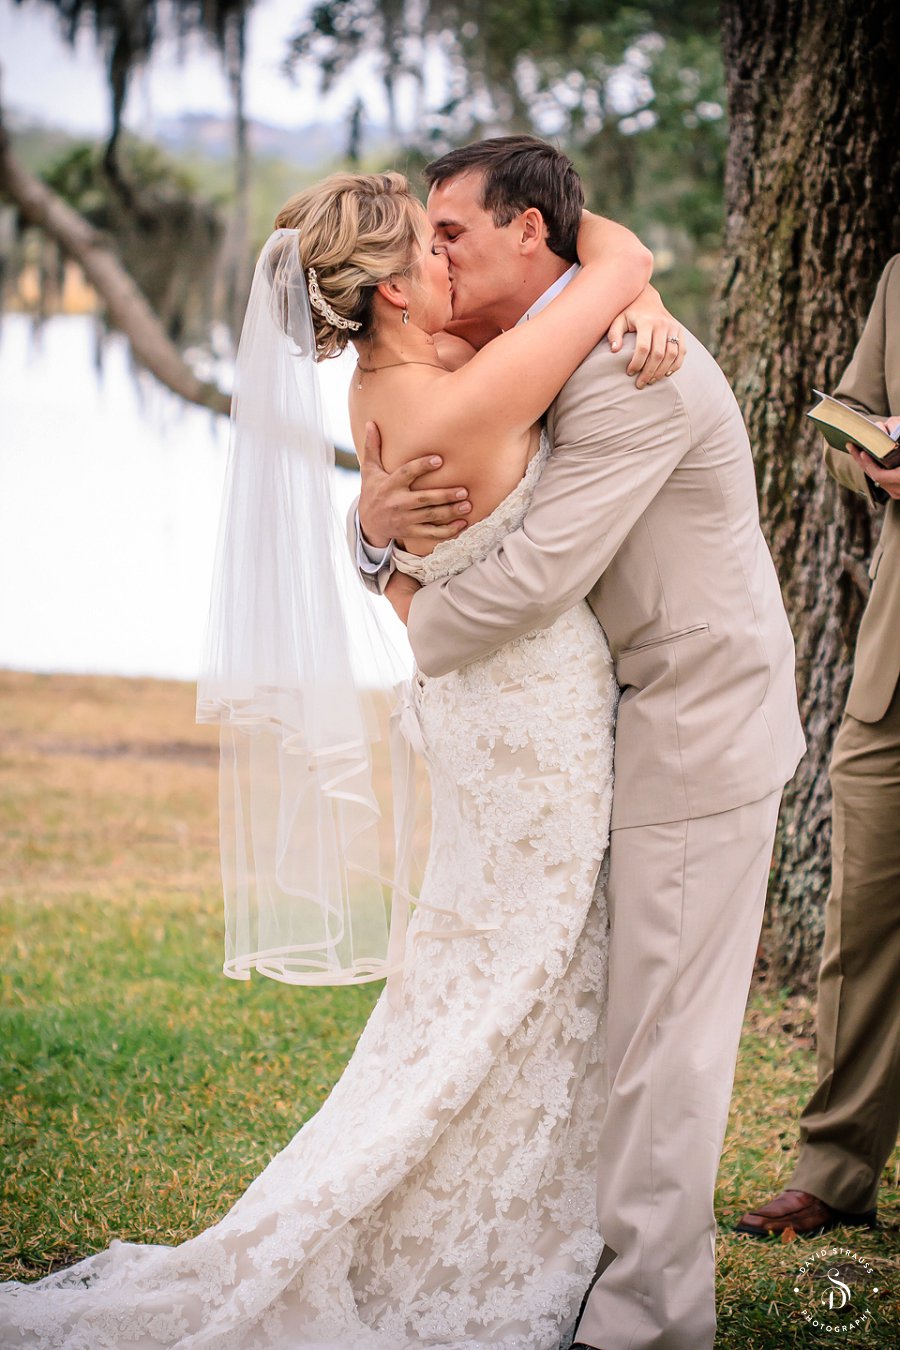 Old Wide Awake Plantation Wedding Photography - Top Charleston Venues - Bette and Anthony - 19